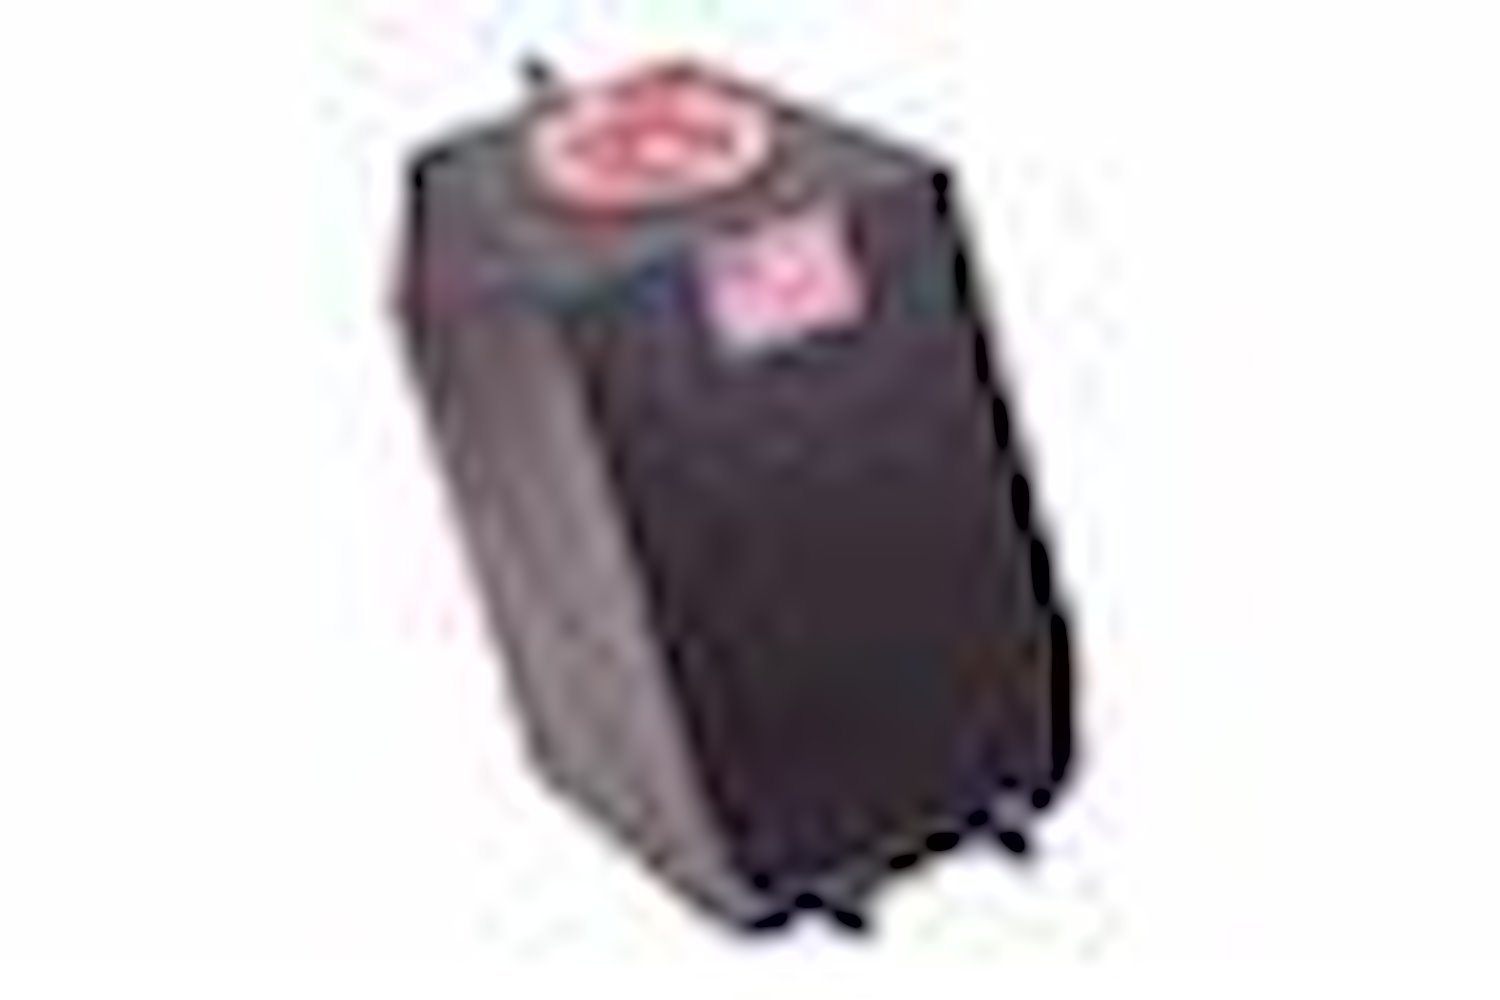 4 Gallon Upright Fuel Cell with Aircraft Style Cap